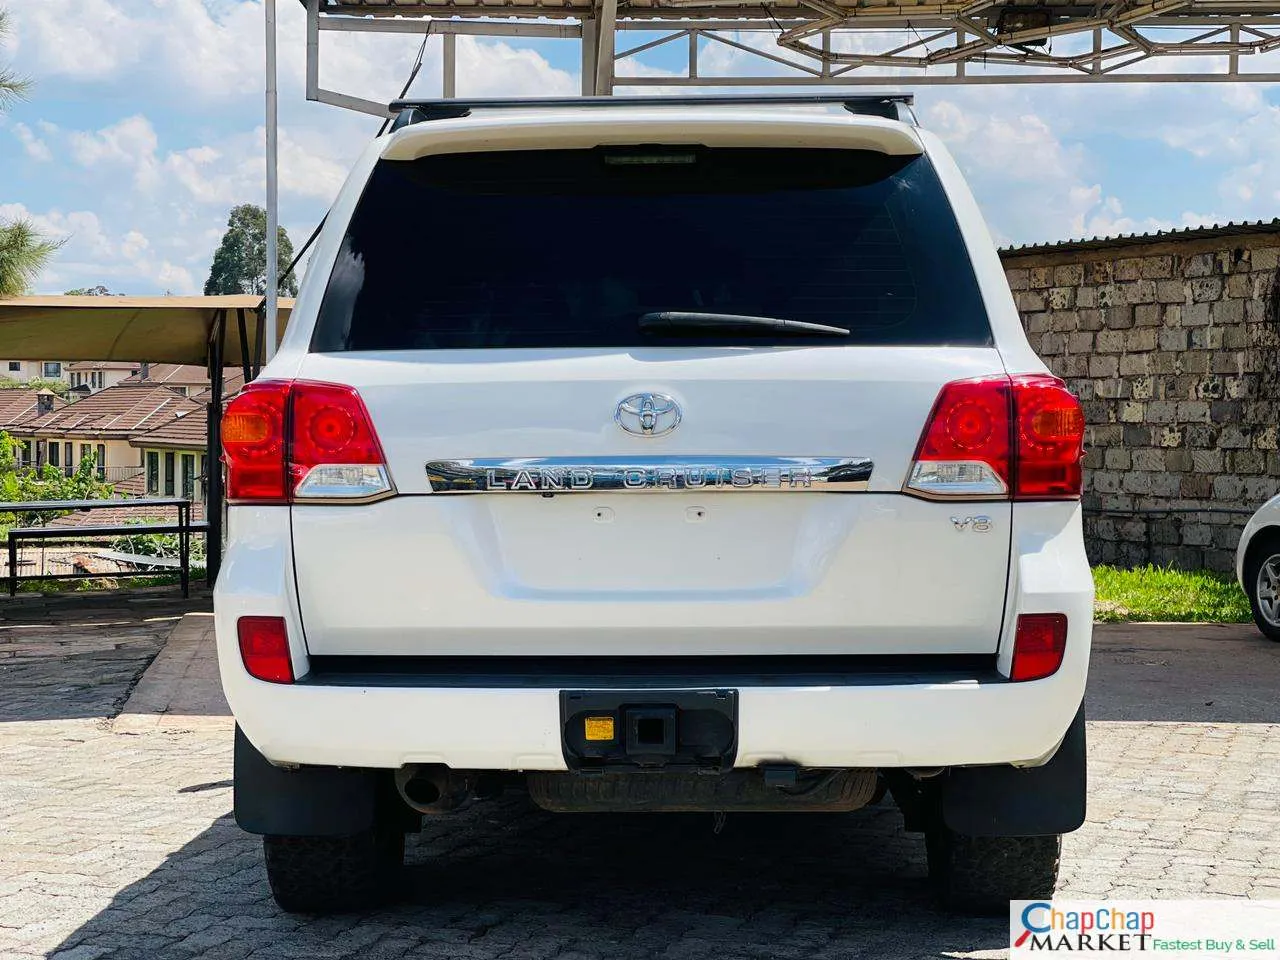 Toyota Land Cruiser VX V8 DIESEL LC 200 SERIES QUICK SALE Trade in Ok EXCLUSIVE HIRE PURCHASE INSTALLMENTS